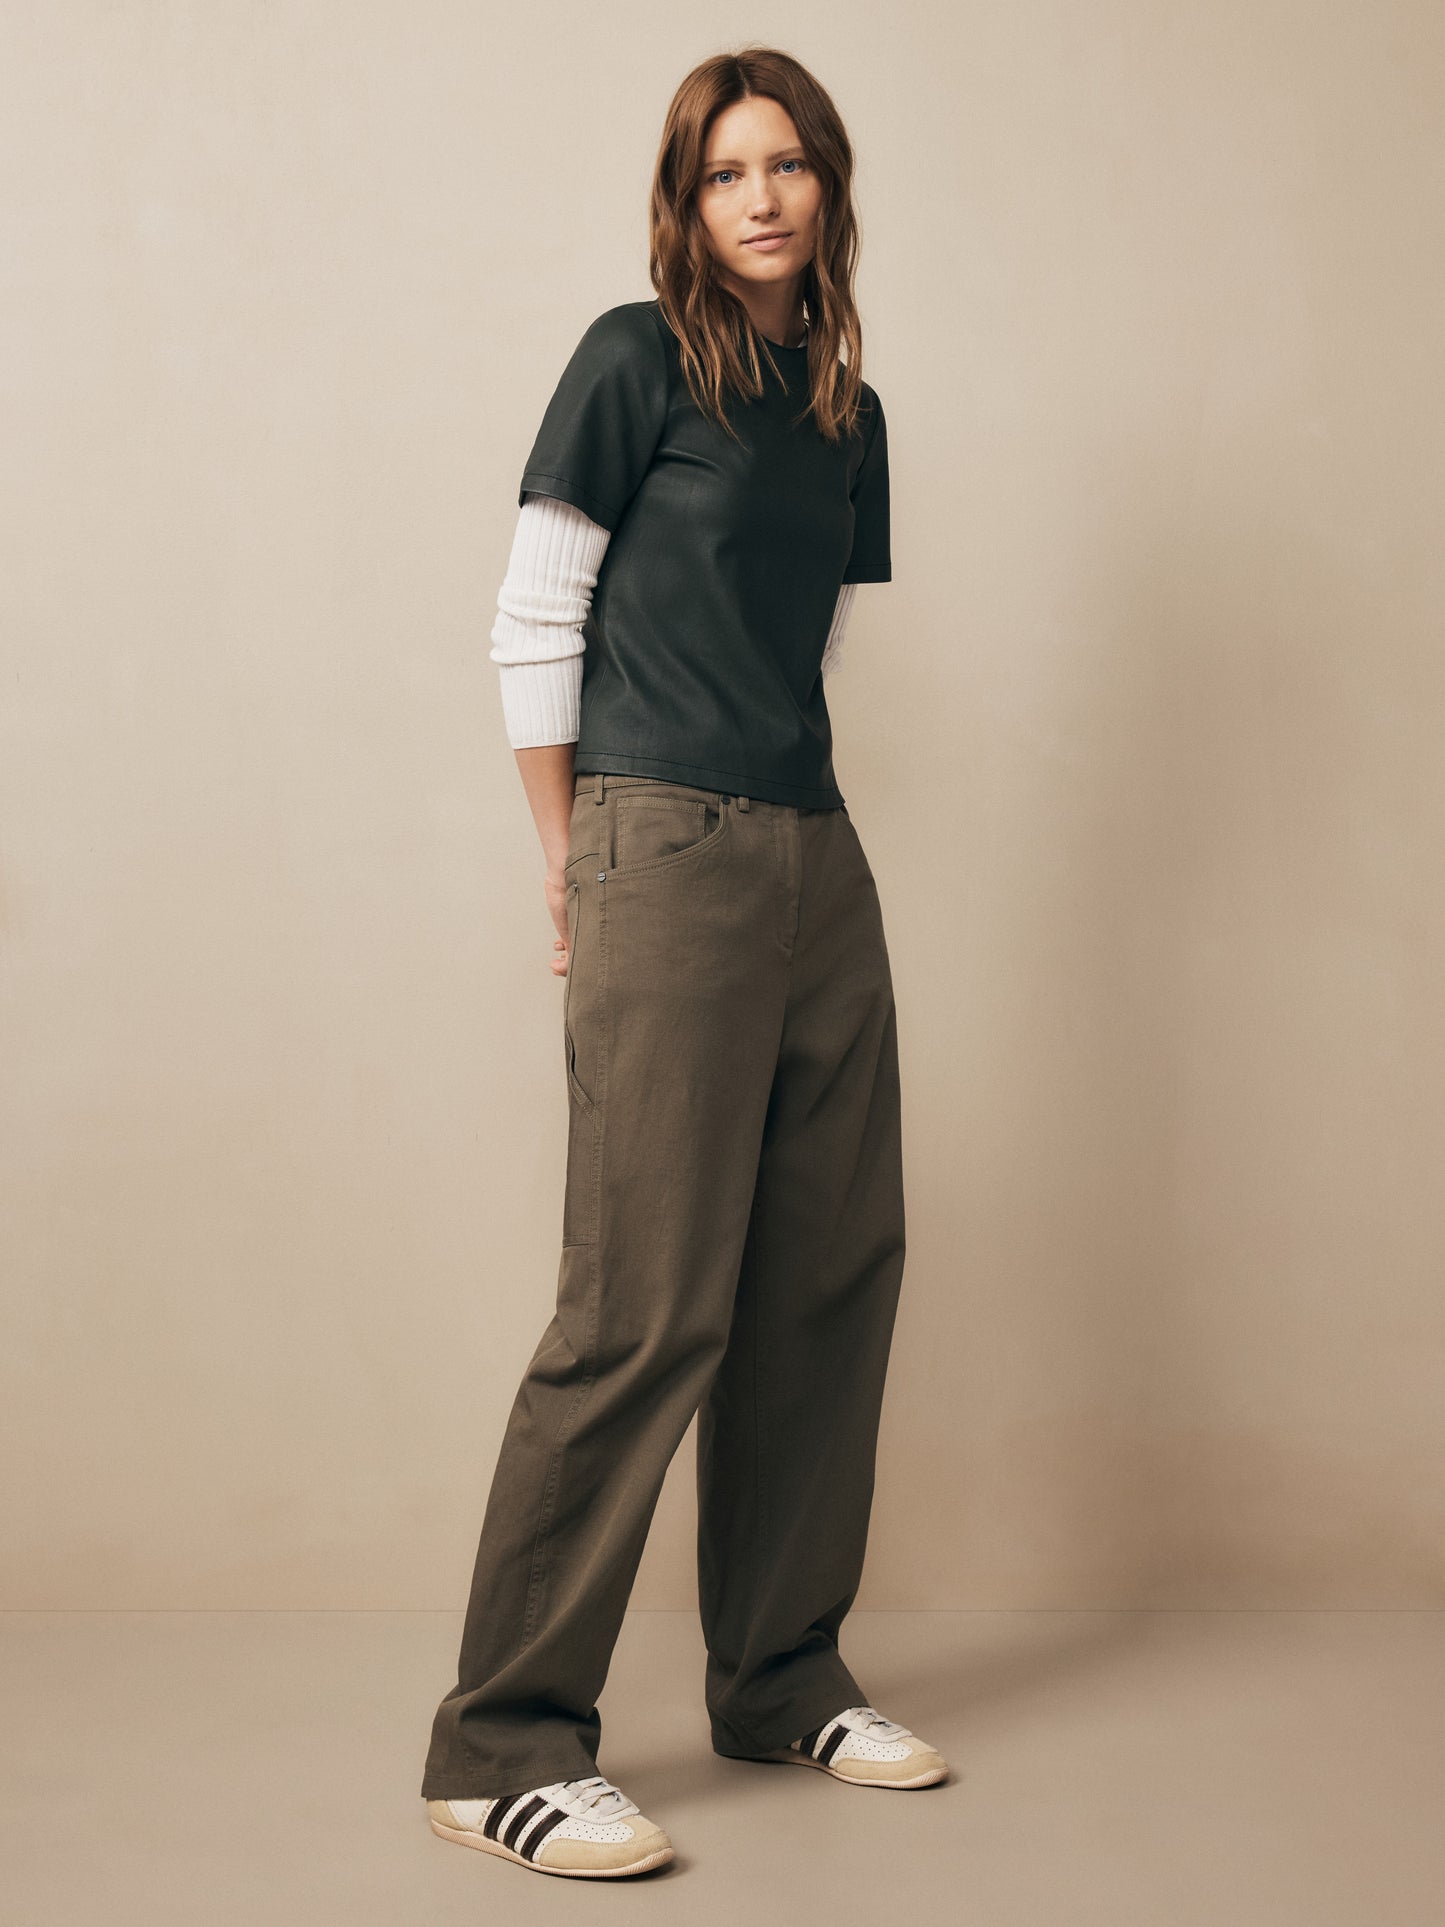 TWP Dark olive Mila Pant in Cotton Twill view 1